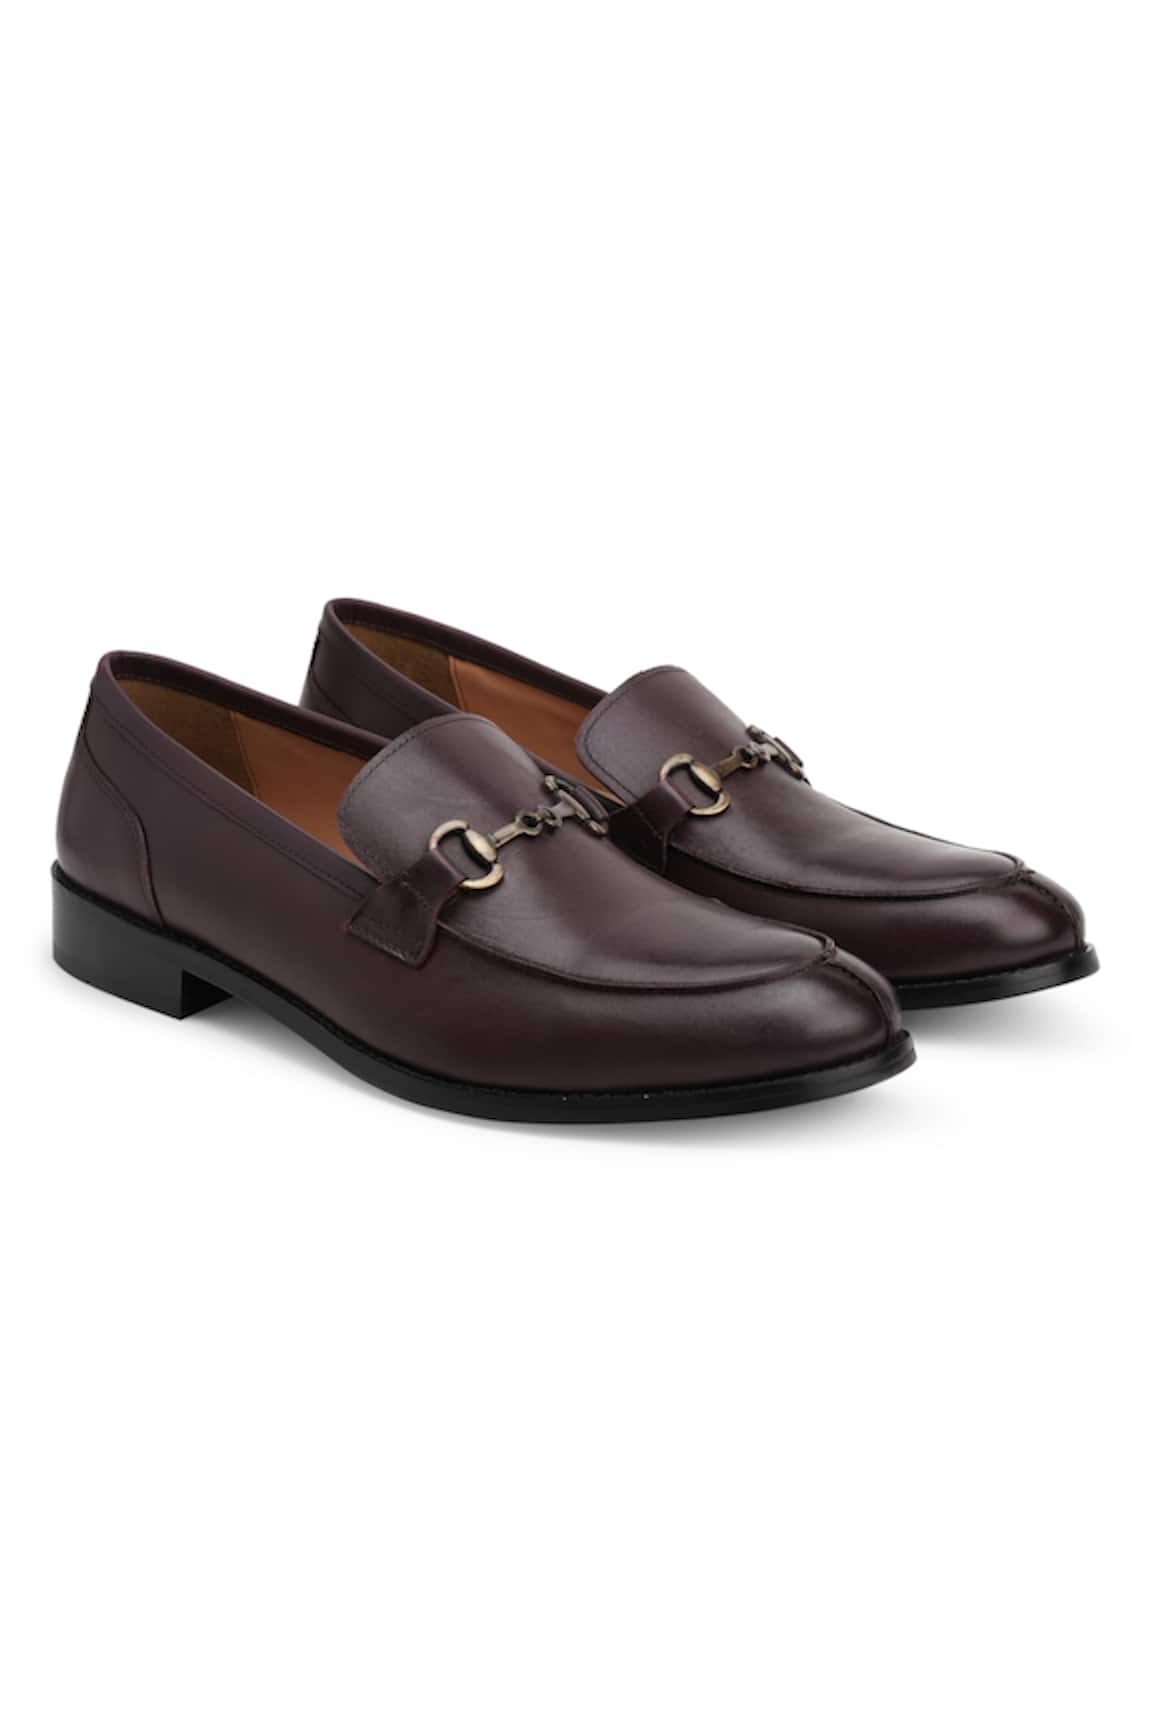 Hats Off Accessories Leather Slip-On Shoes